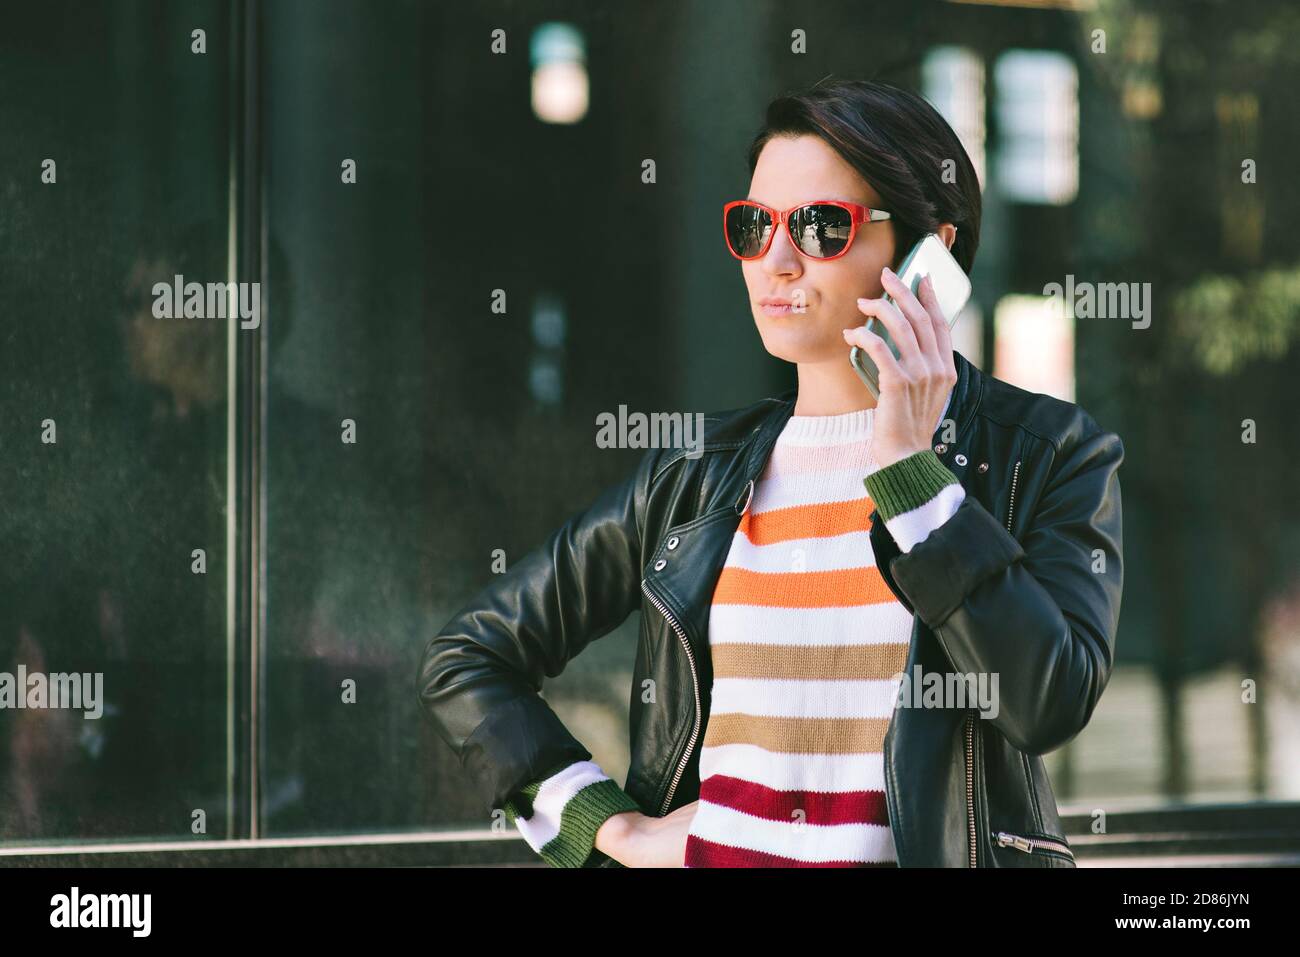 Young millennial female has her cell phone to her ear listening - City - Serious face - Daytime Stock Photo